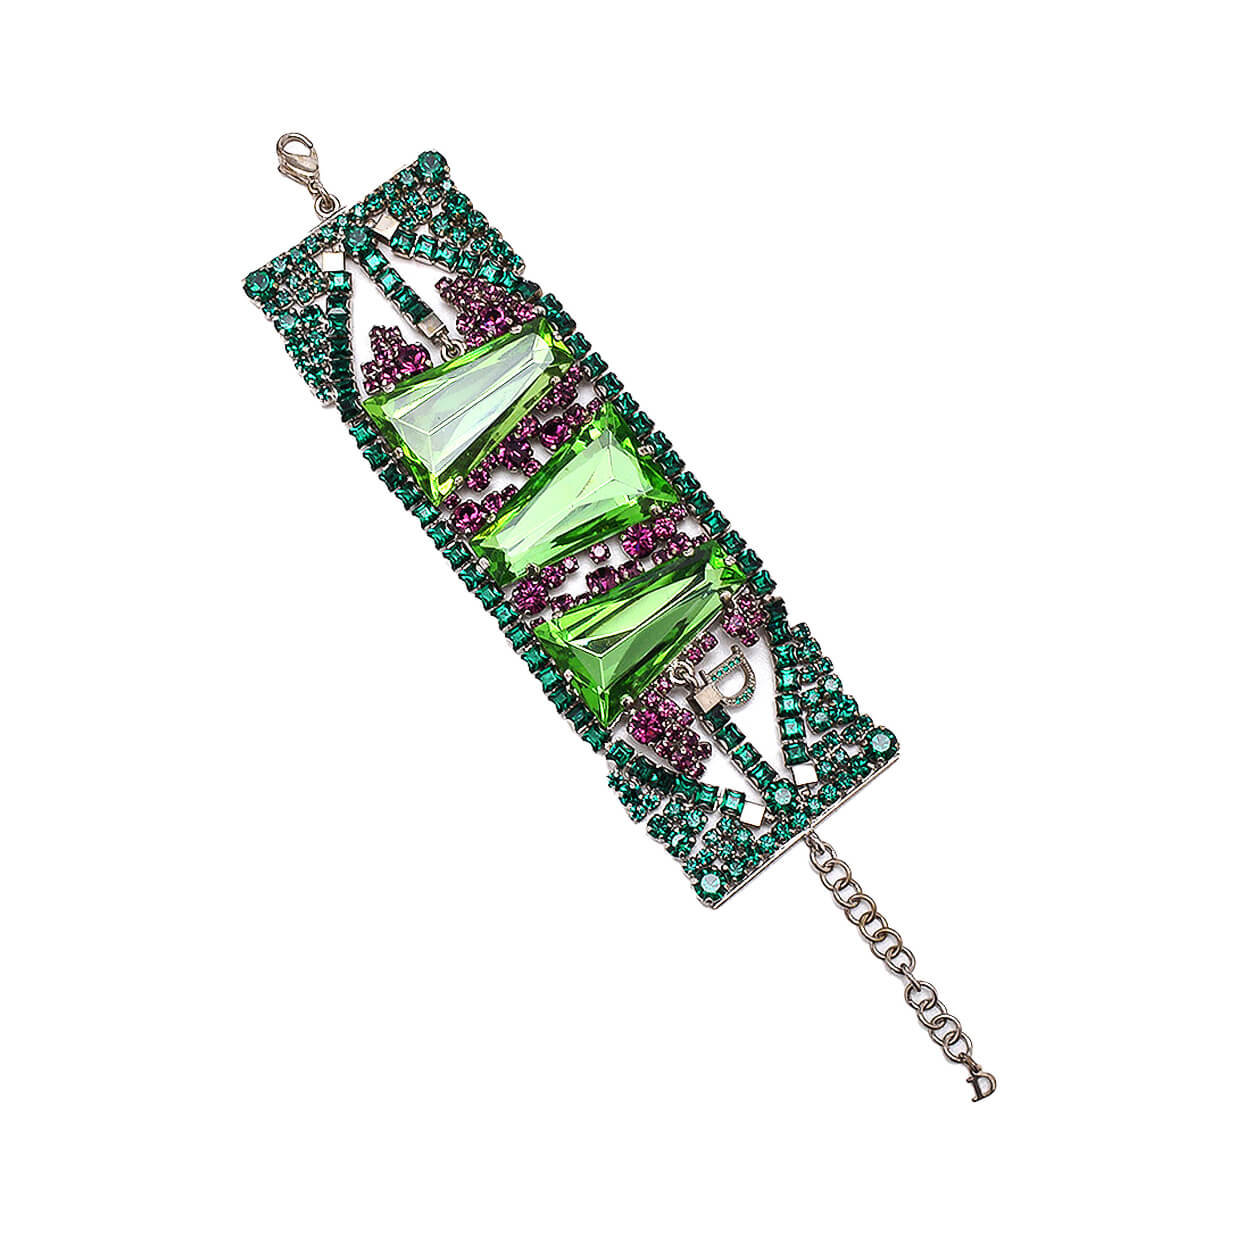 Christian Dior - Christian Dior by John Galliano Couture Runway Bracelet With Green Crystals